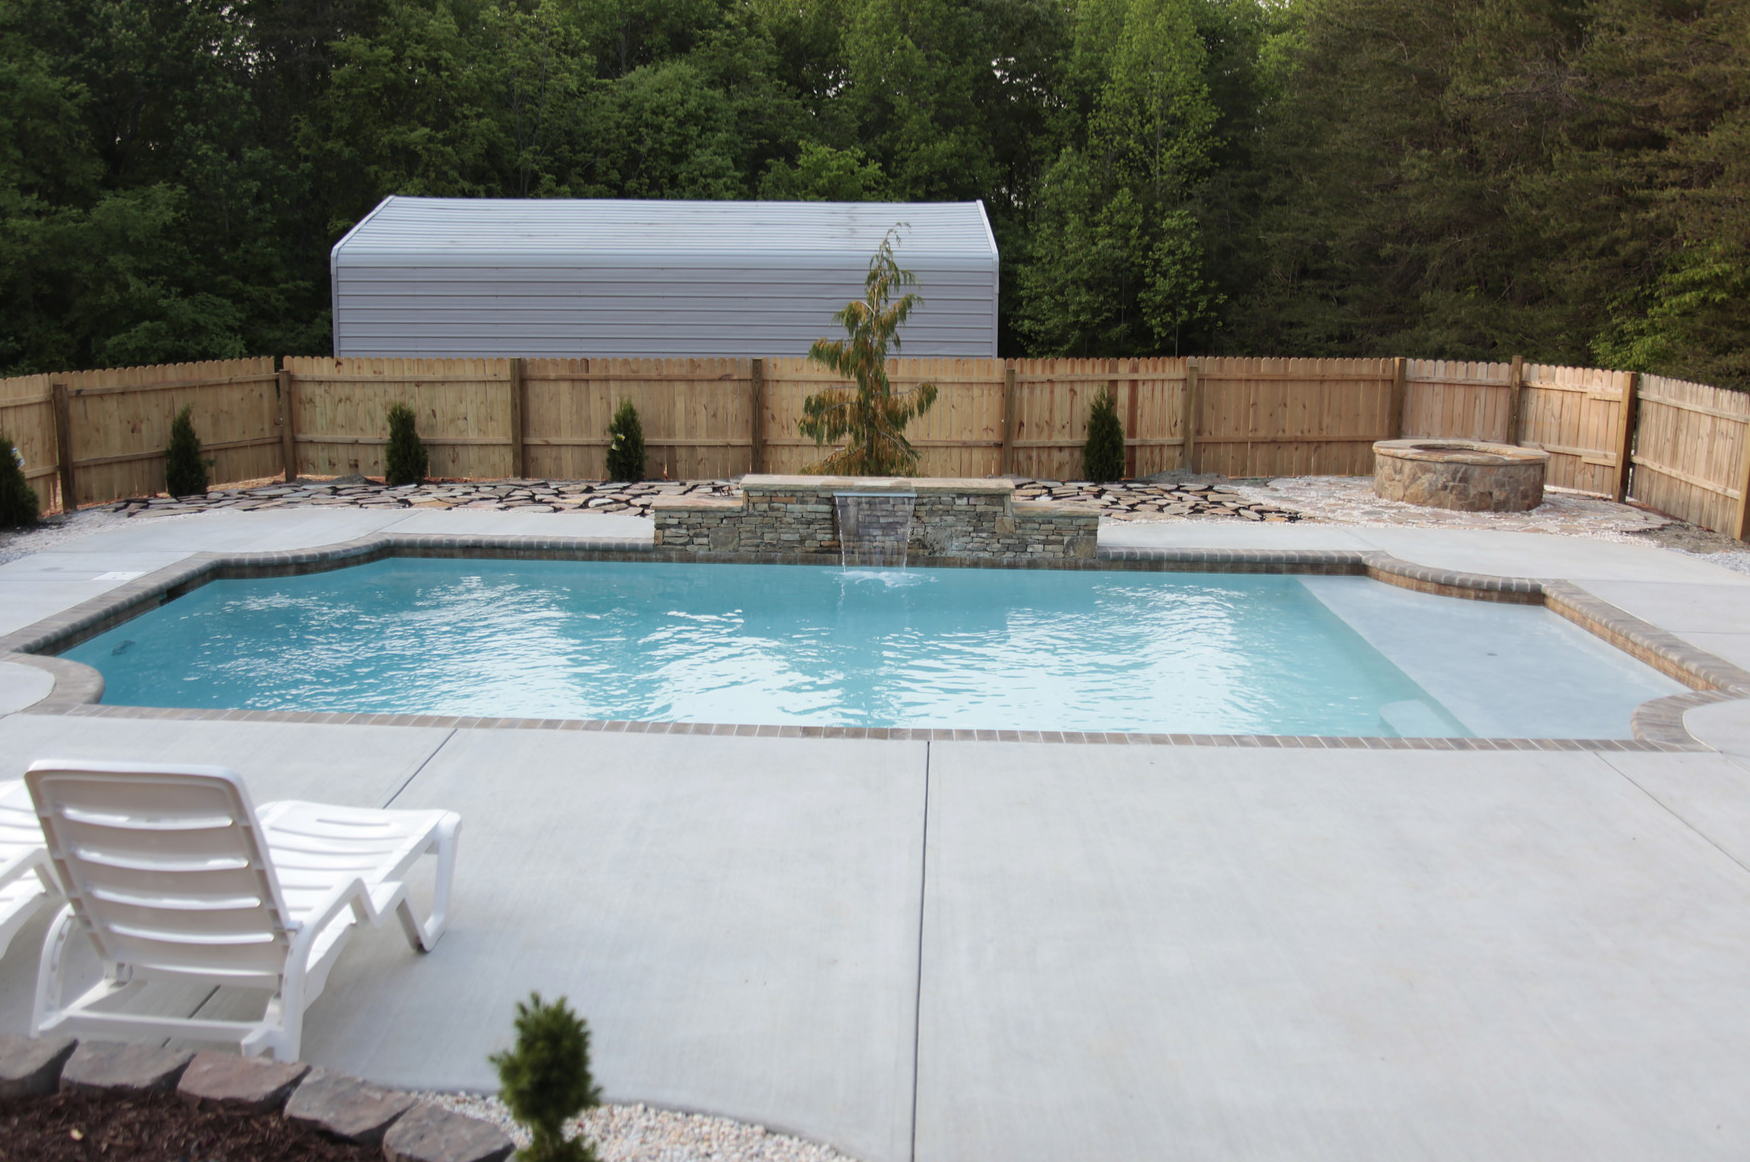 Custom Inground Concrete Swimming Pools in Waxhaw NC from Carolina Pool Consultants - 704-799-5236